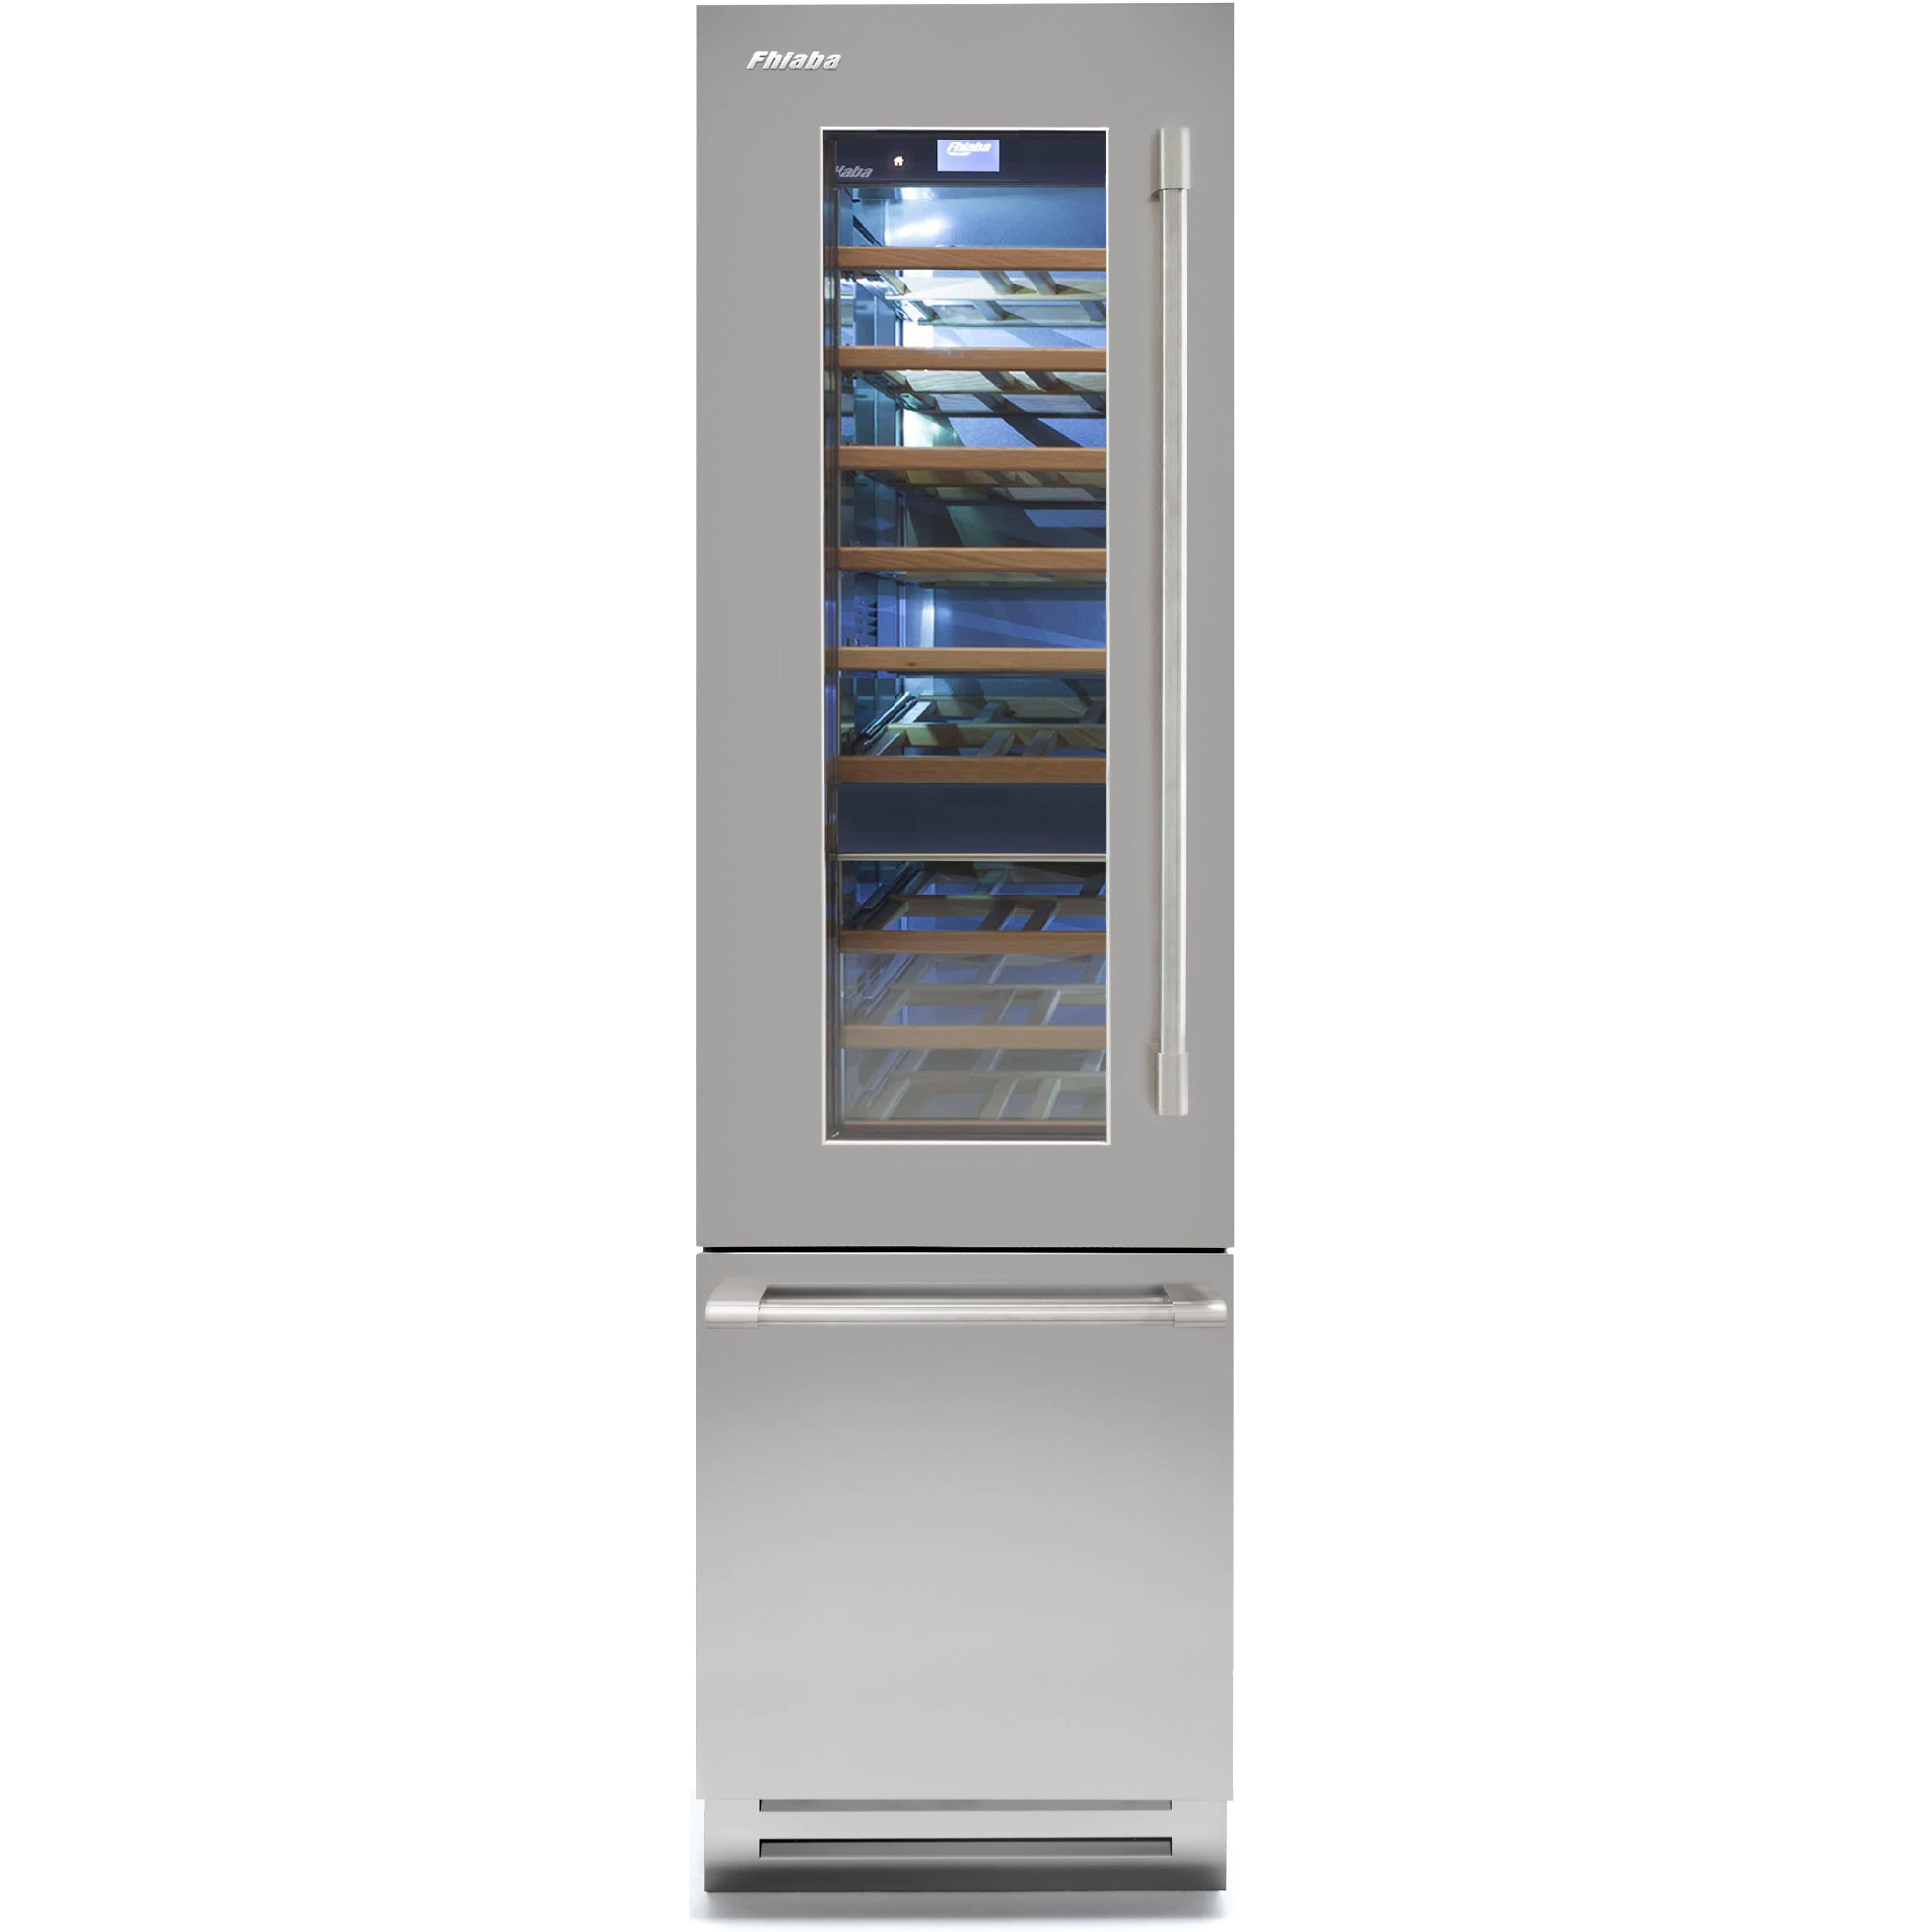 Fhiaba 24-inch Built-in Wine Cellar and Freezer Refrigerator with Smart Touch TFT Display FK24BWR-LGS1 Refrigerators FK24BWRLGS1 Luxury Appliances Direct